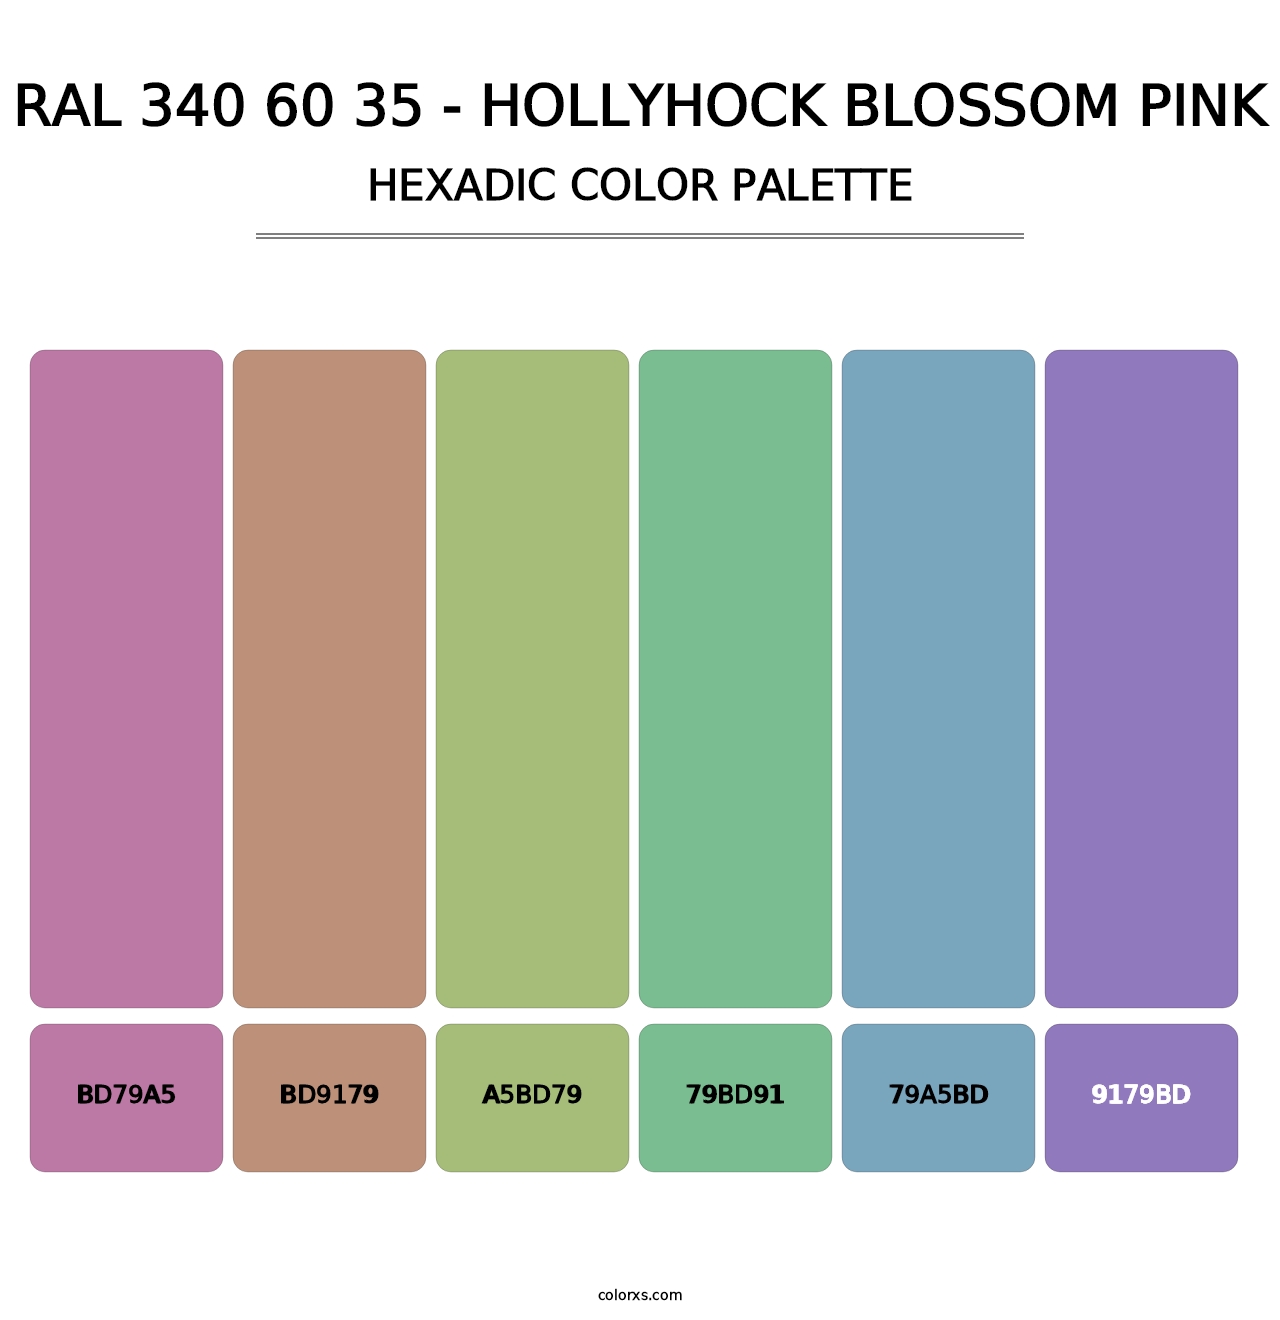 RAL 340 60 35 - Hollyhock Blossom Pink - Hexadic Color Palette